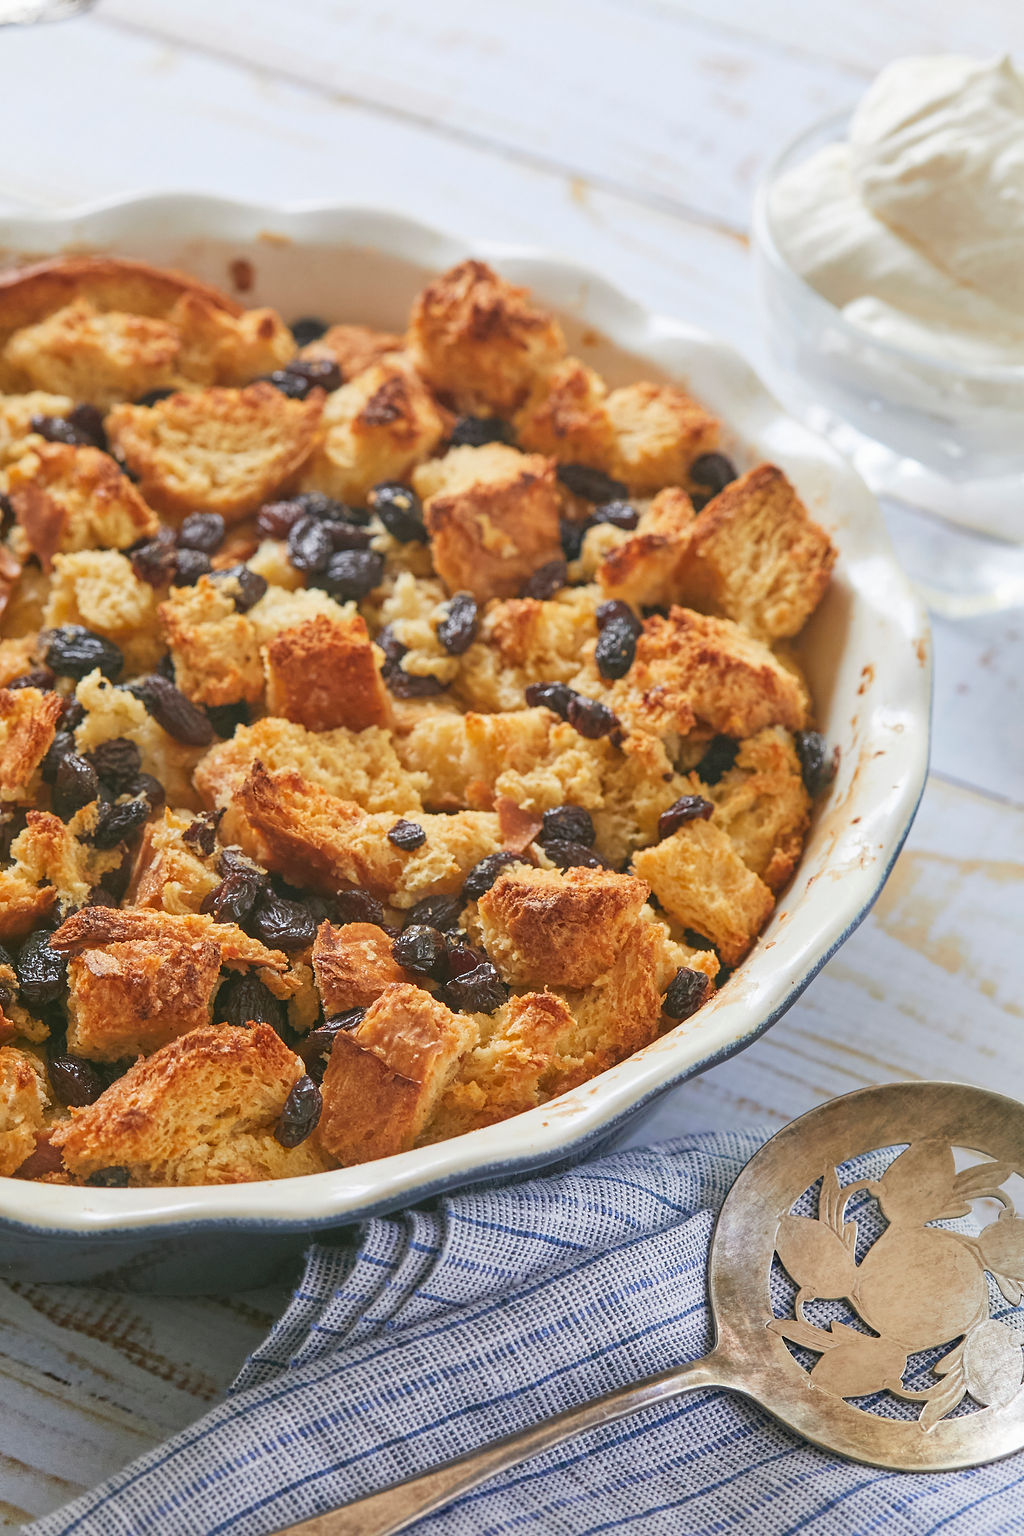 Rum Raisin Bread and Butter Pudding in a bowl with loads of rum-soaked raisins.